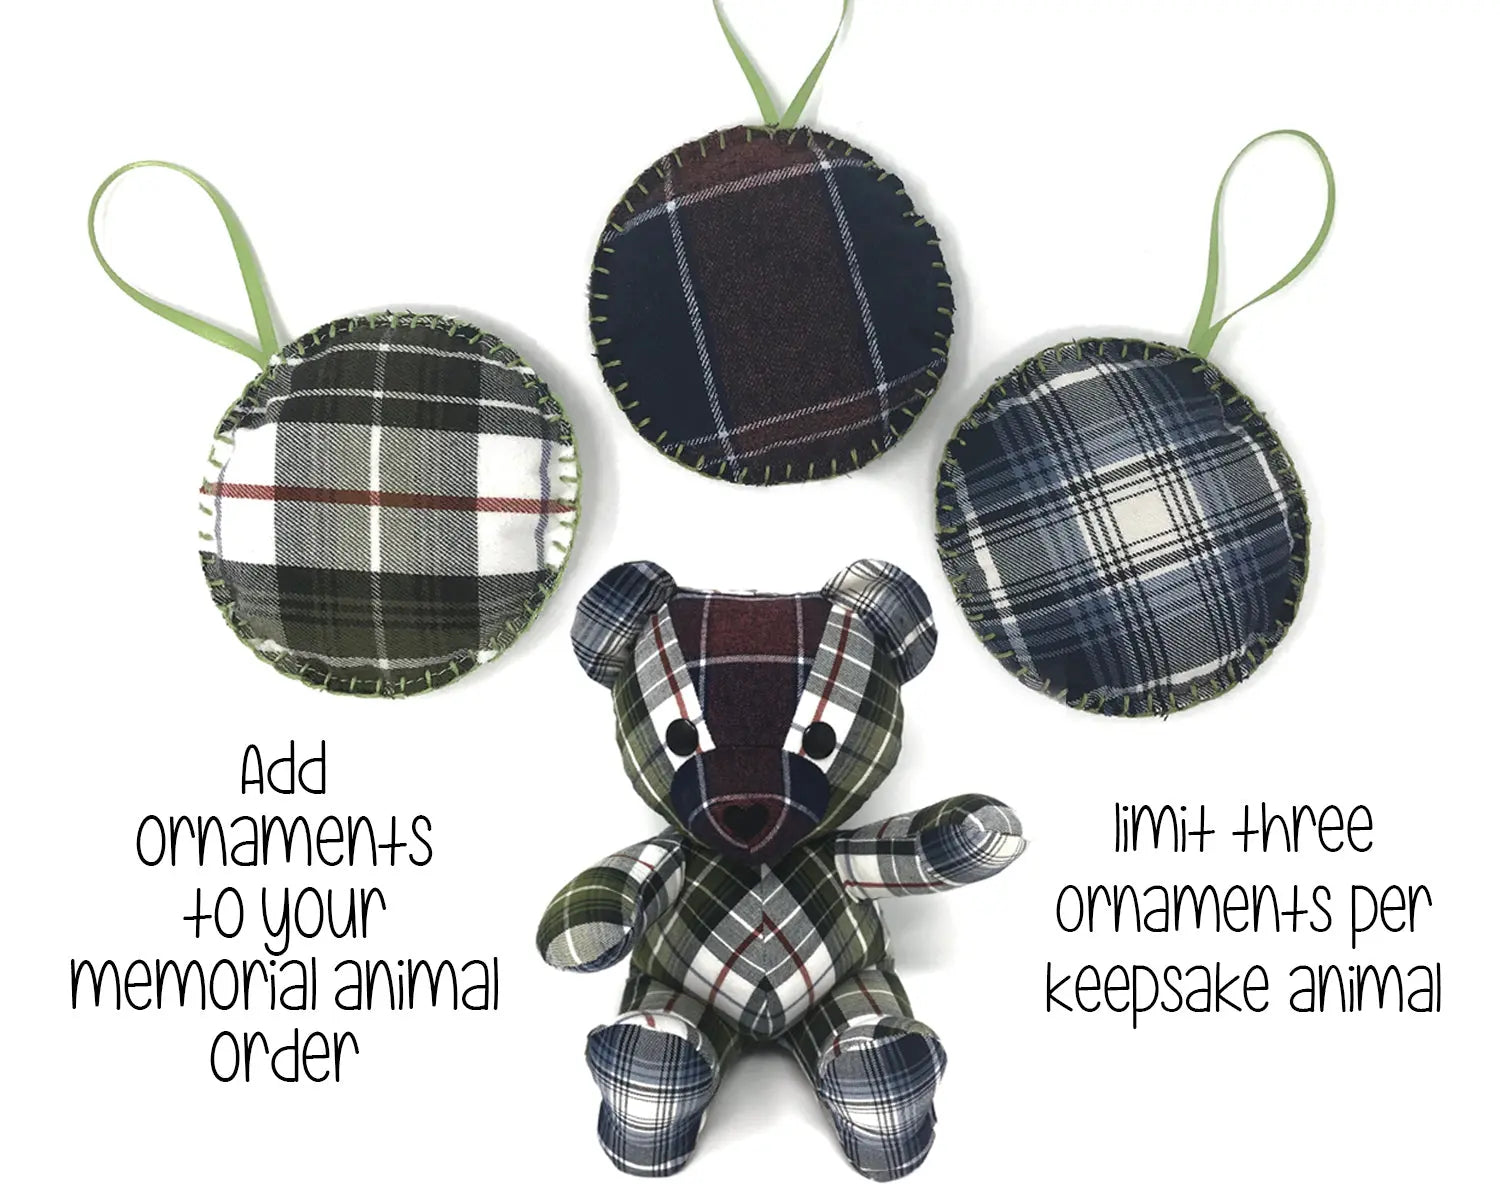 memory ornaments made from clothing